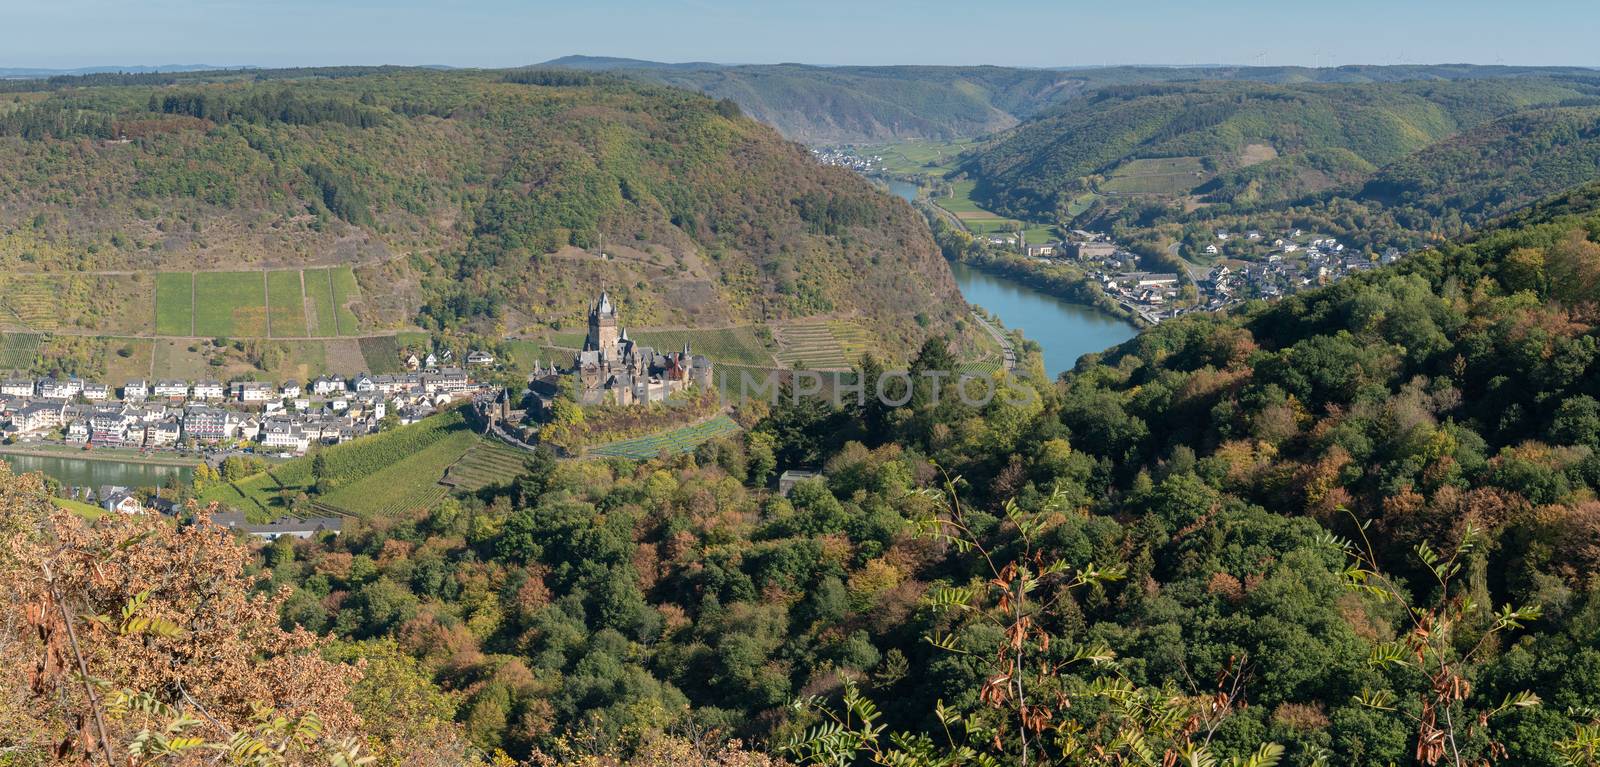 Panoramic view to the city of Cochem close to the Moselle river, Germany Europe